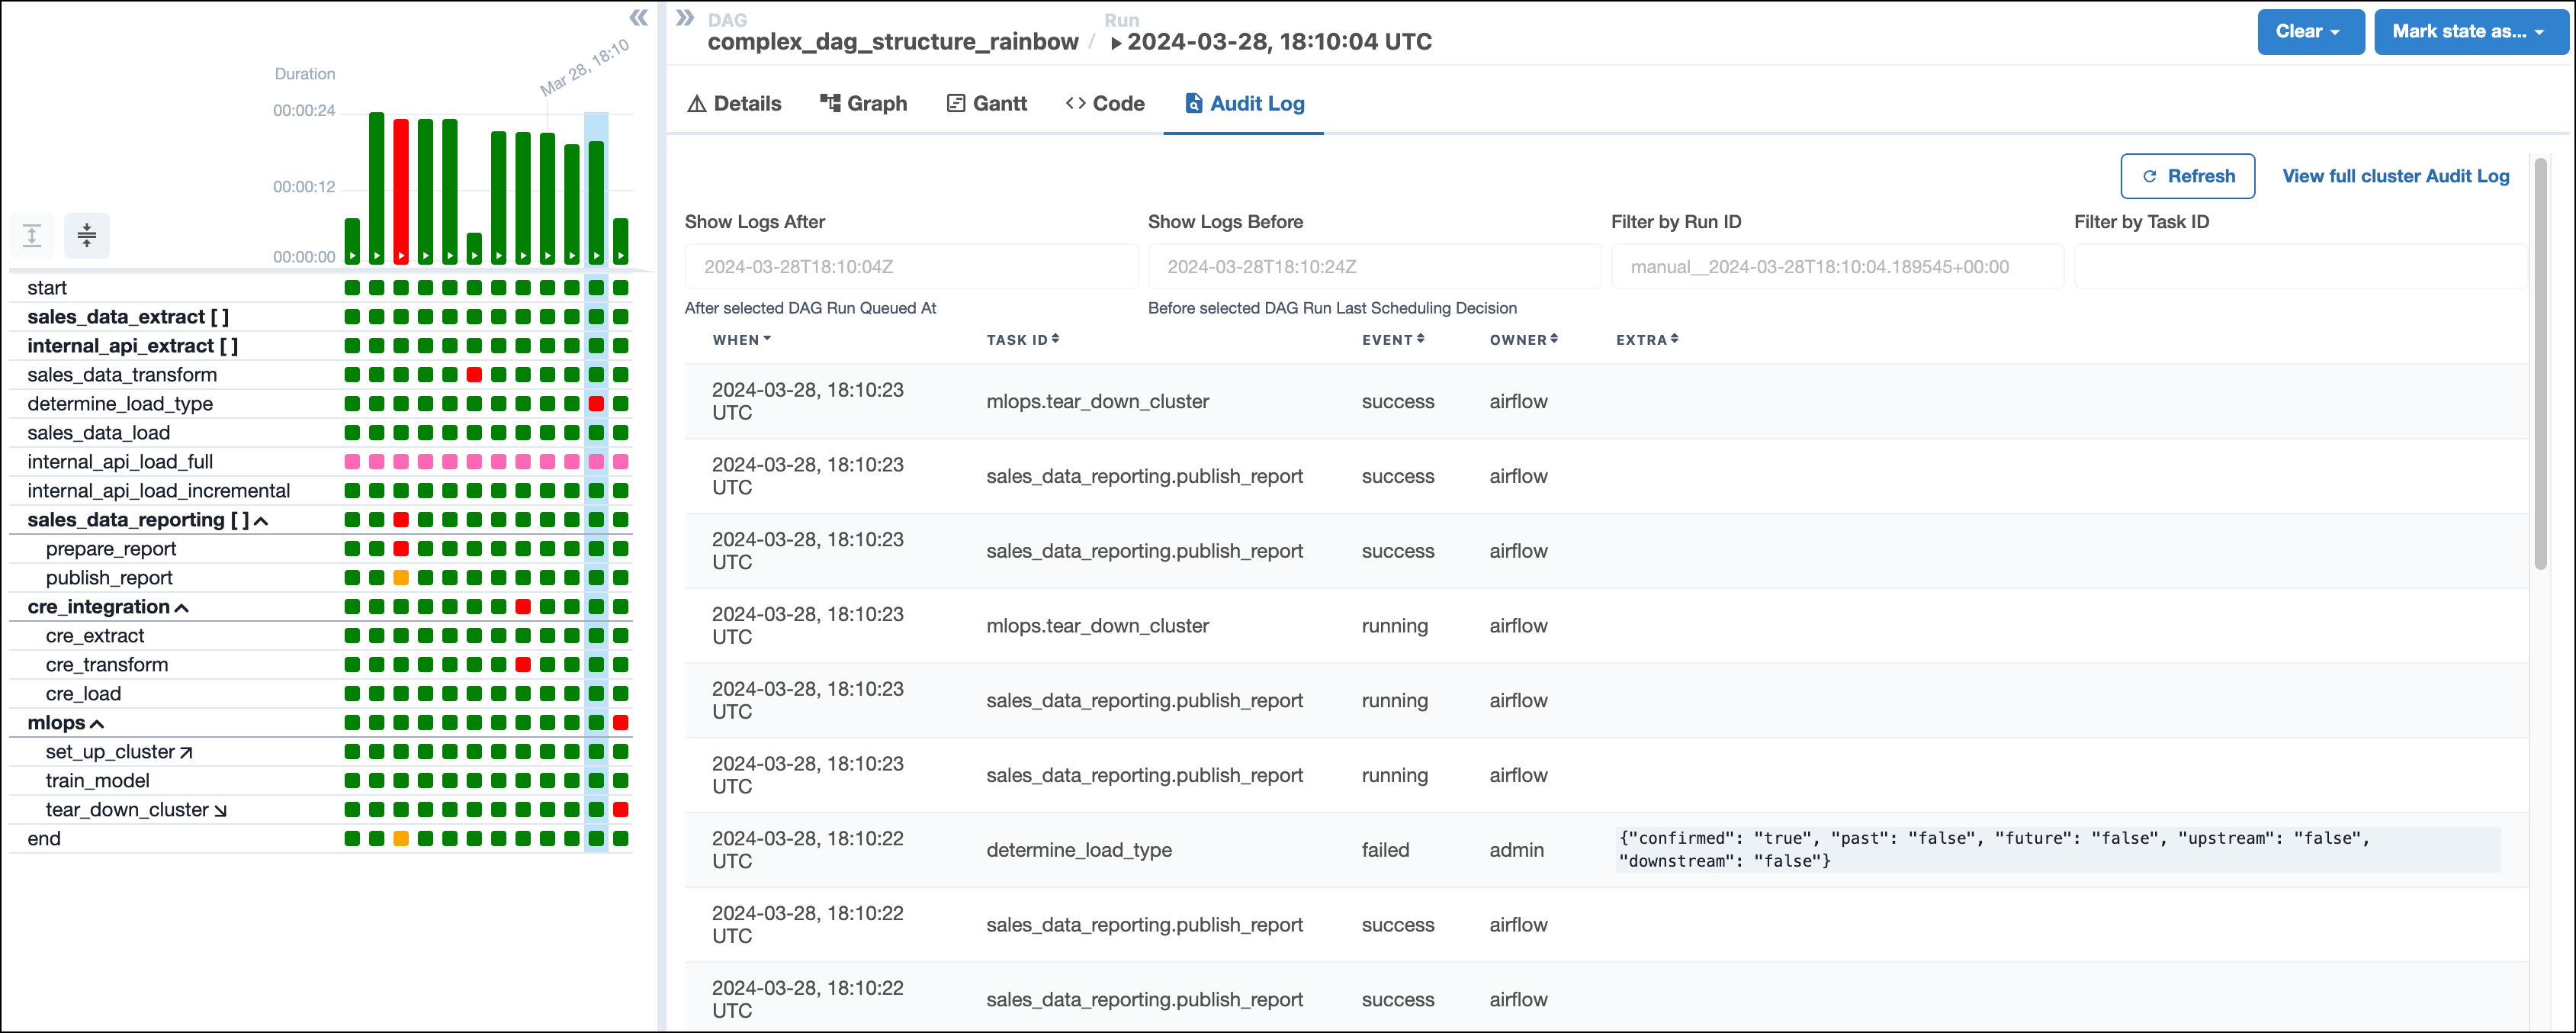 Screenshot of the Audit Logs tab showing a list of events that have occurred in the Airflow environment for one run of the complex_dag_structure_rainbow DAG.